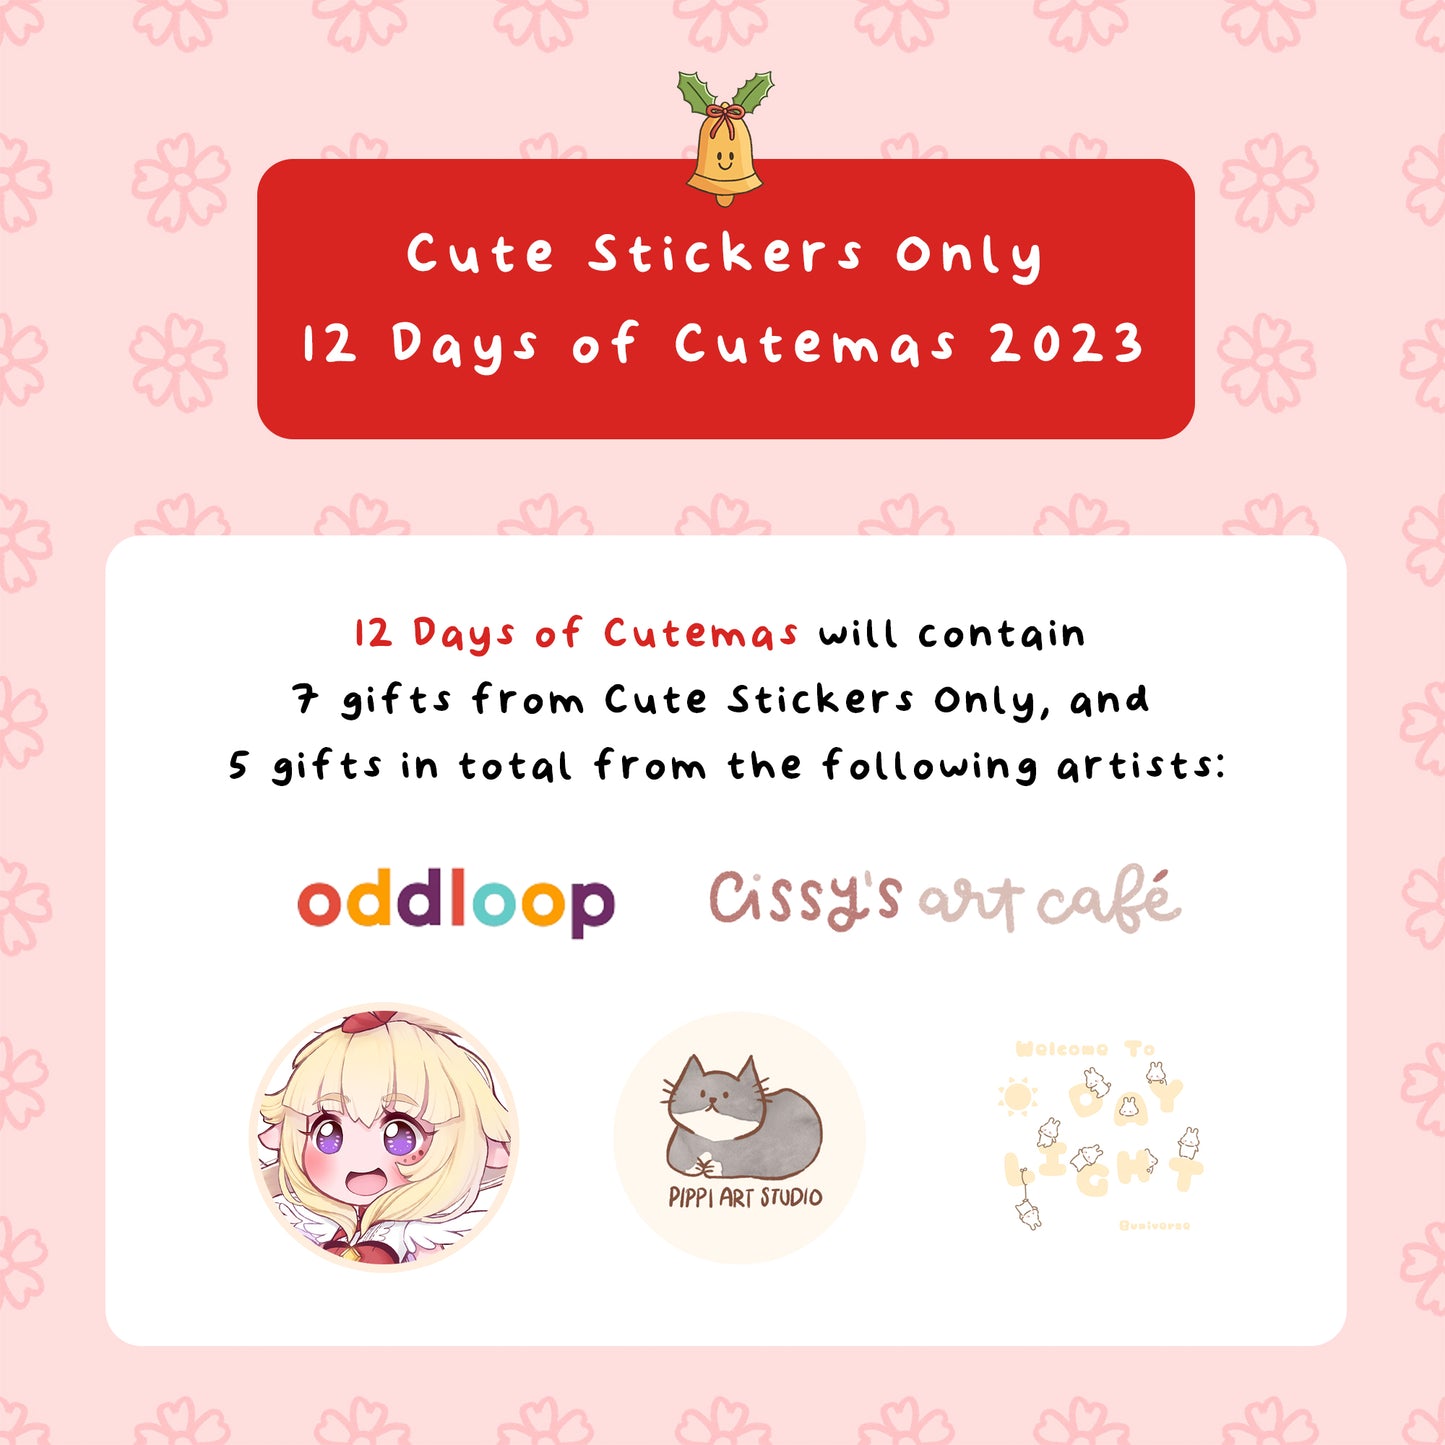 [PRE-ORDER] Cute Stickers Only Advent Calendar 2023